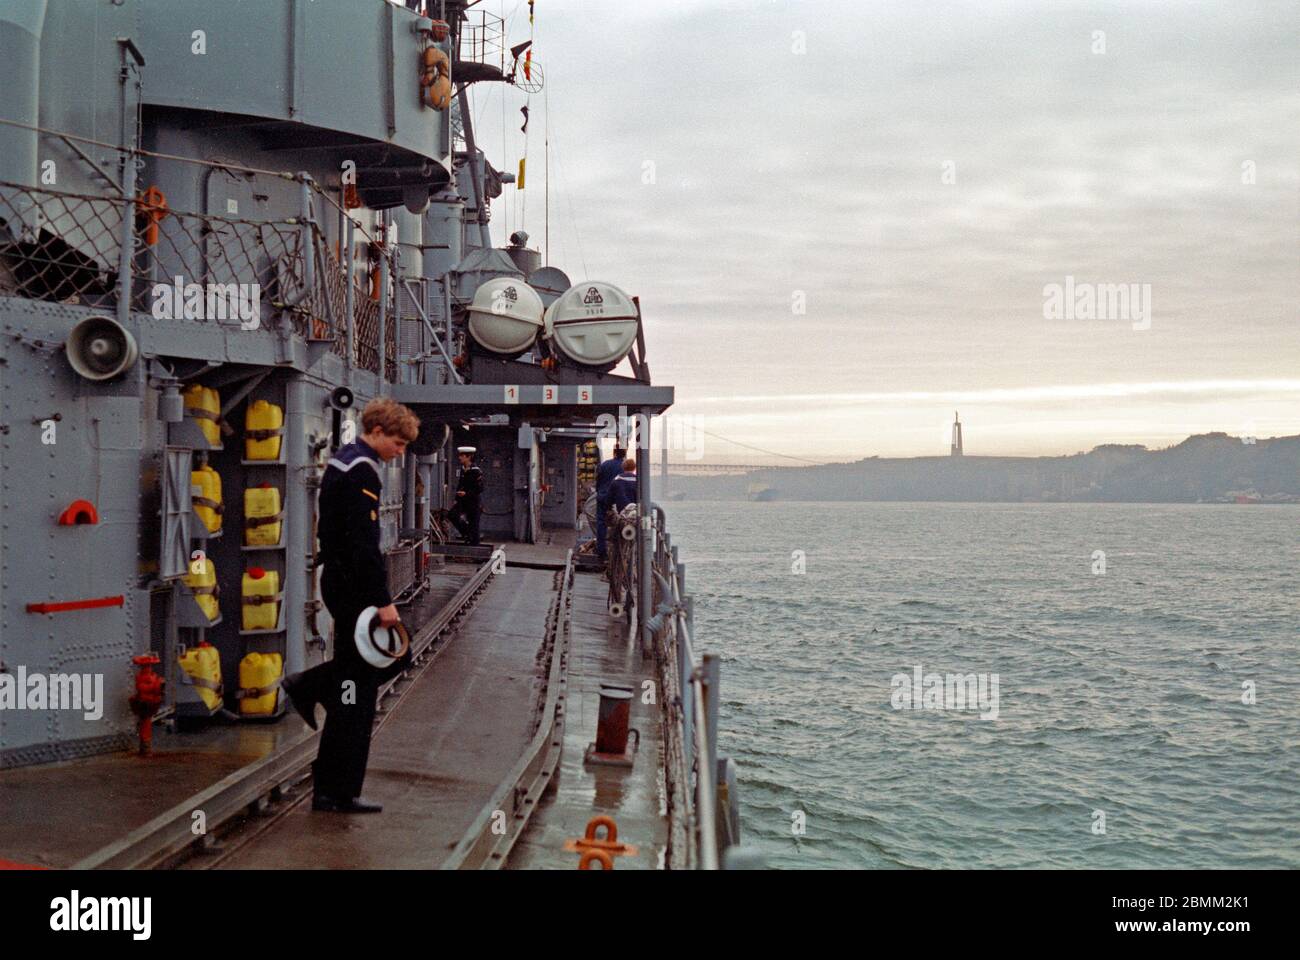 Destroyer 5 of the German Navy ariving at the harbour, February 03, 1982, Lisbon, Portugal Stock Photo